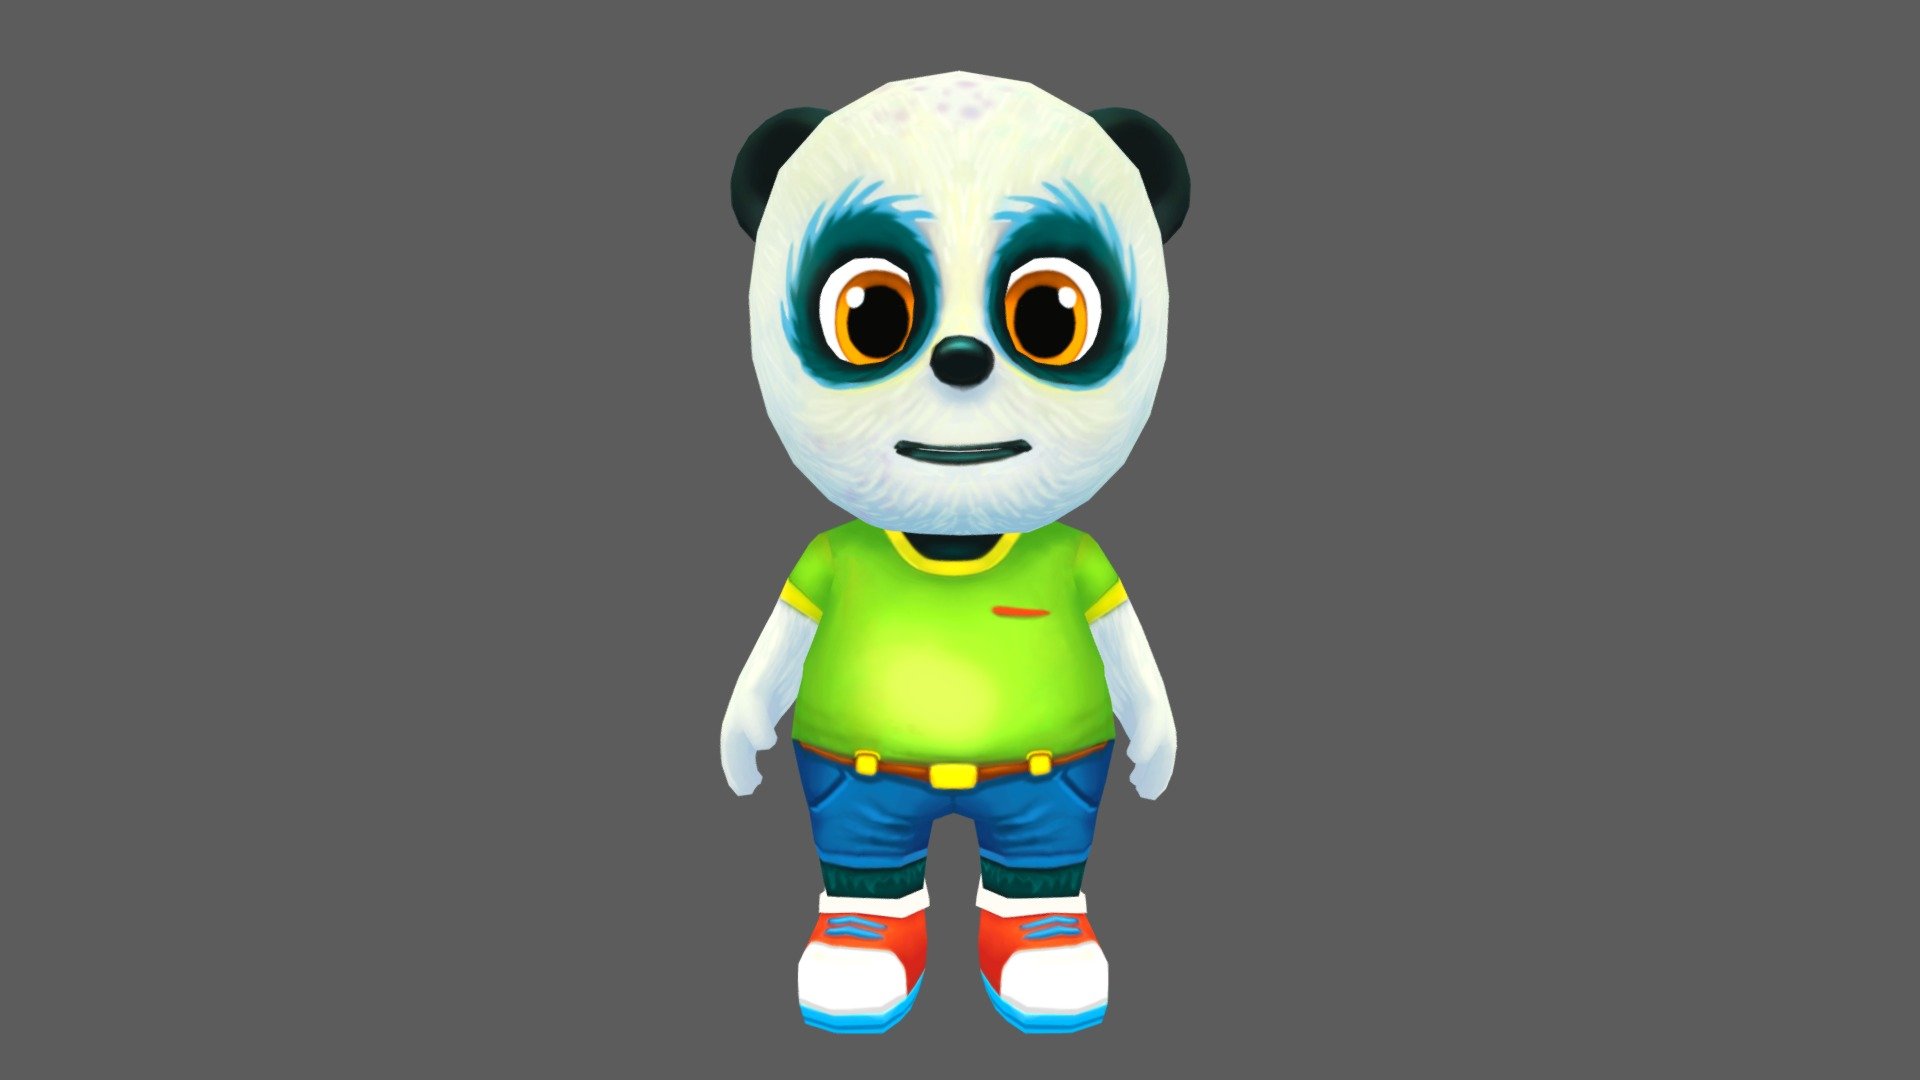 Panda Bear character for games and animations. The model is game ready and compatible with game engines.

The model is low poly with four texture resolutions 4096x4096, 2048x2048, 1024x1024 &amp; 512x512.

Included Files:


Maya (.ma, .mb) - 2015 - 2019
FBX - 2014 - 2019
OBJ

The package includes 18 Animations which are as follows:


Run
Idle
Jump
Leap left
Leap right
Skidding
Roll
Crash &amp; Death
Power up
Whirl
Whirl jump
Waving in air
Backwards run
Dizzy
Gum Bubble
Gliding
Waving
Looking behind

The model is fully rigged and can be easily animated in case further animating or modification is required.

The model is game ready at:


2746 Polygons
2745 Vertices

The model is UV mapped with non-overlapping UV's. The shadows and lights are baked in the texture, although you can add more lights and shadows for rendering and use it as you please 3d model